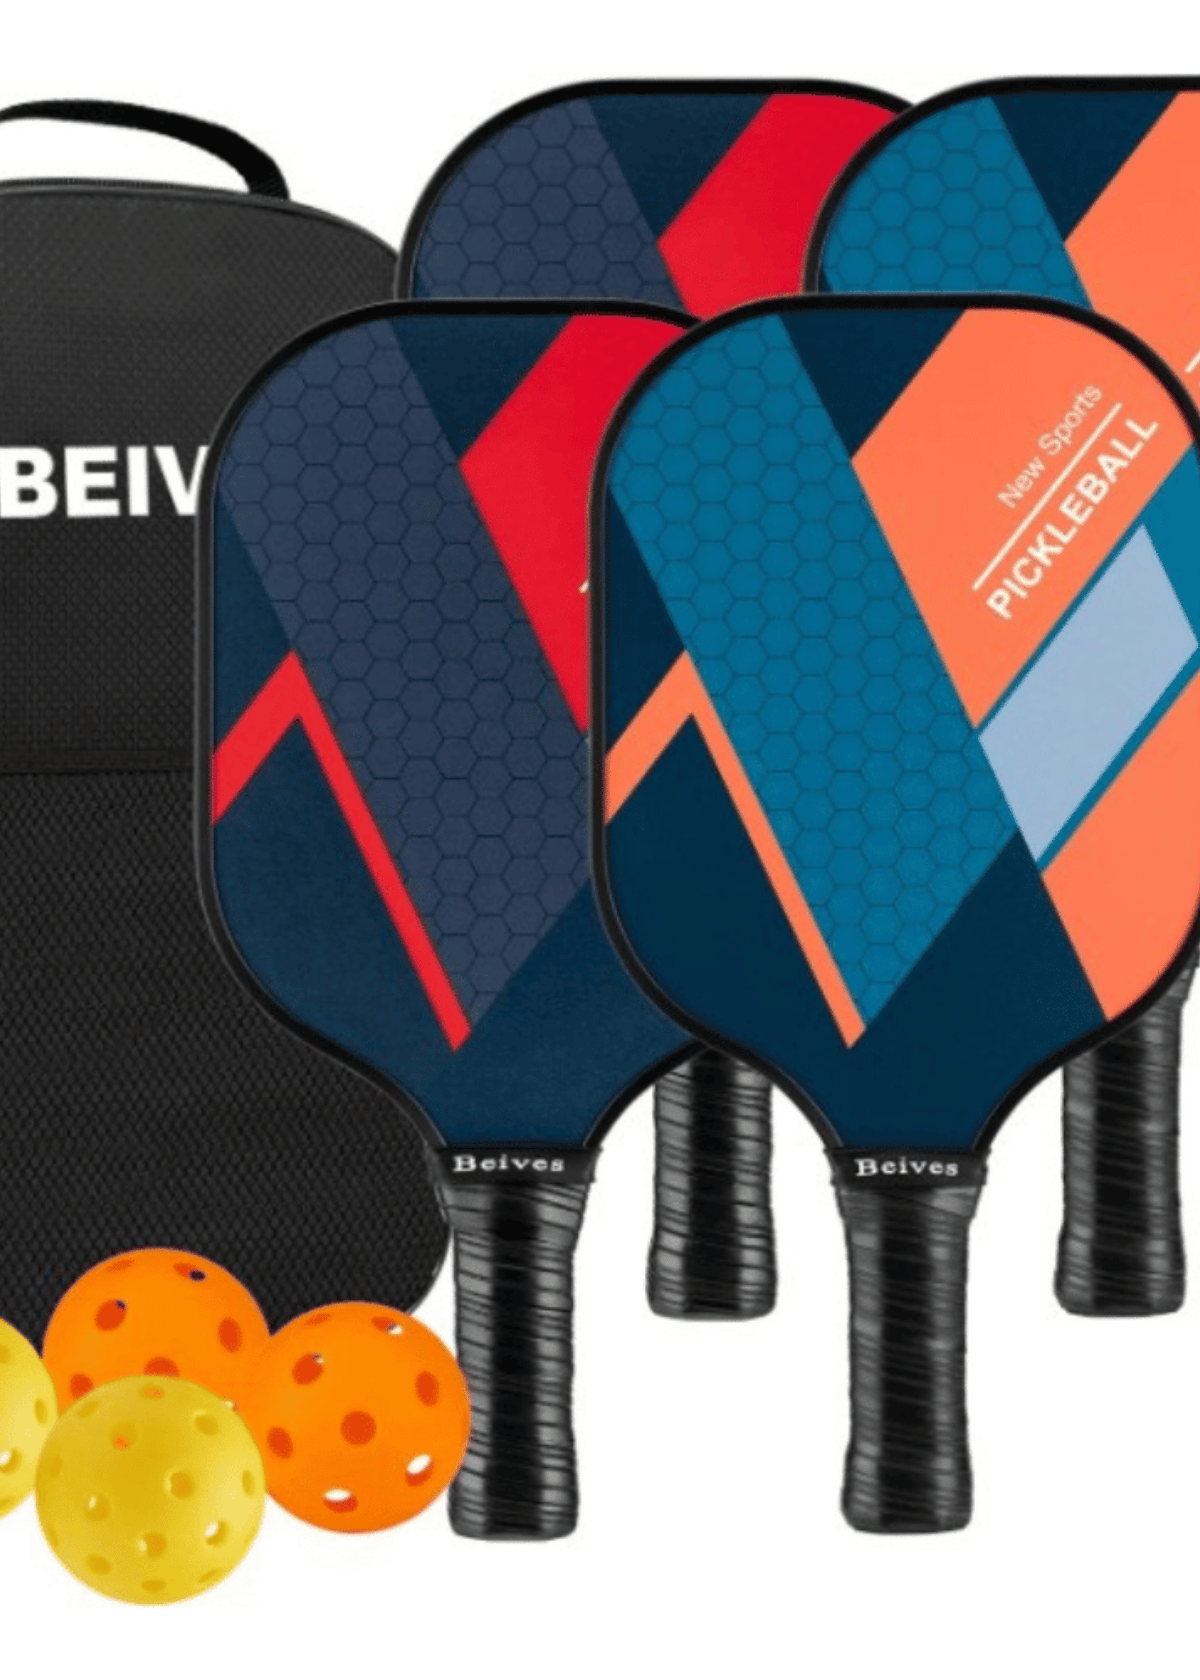 The Best Pickleball Paddles Set of 4 for Doubles Play